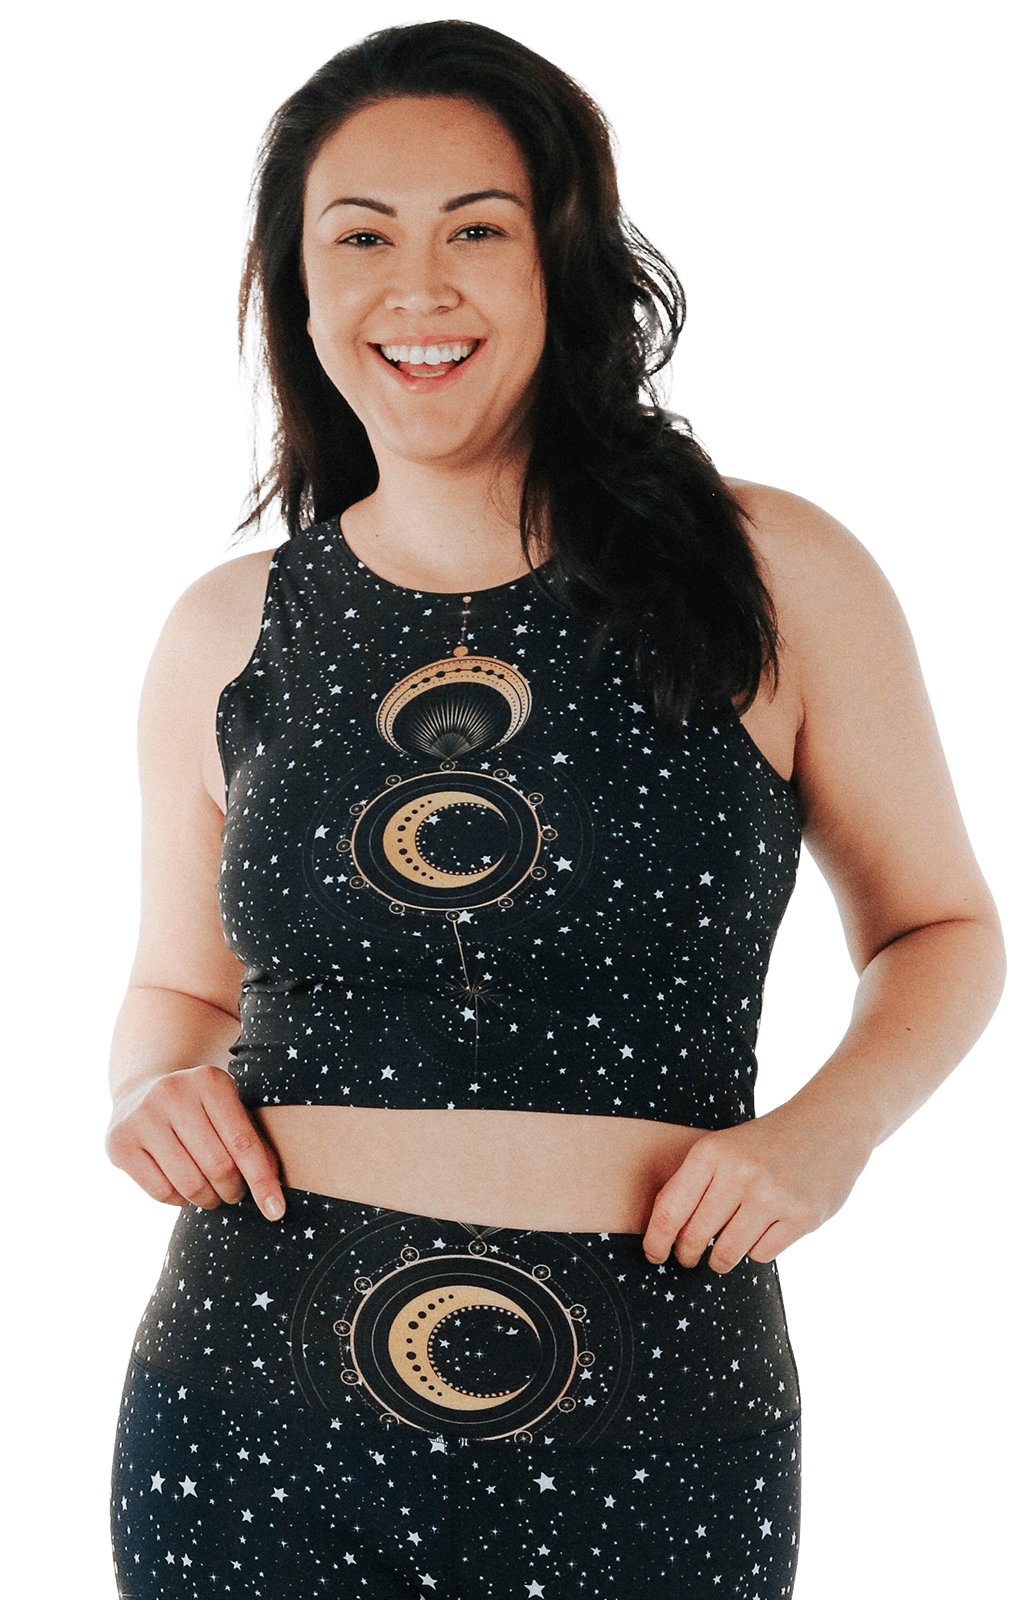 Reversible Knot Top in Fortune Teller by Yoga Democracy